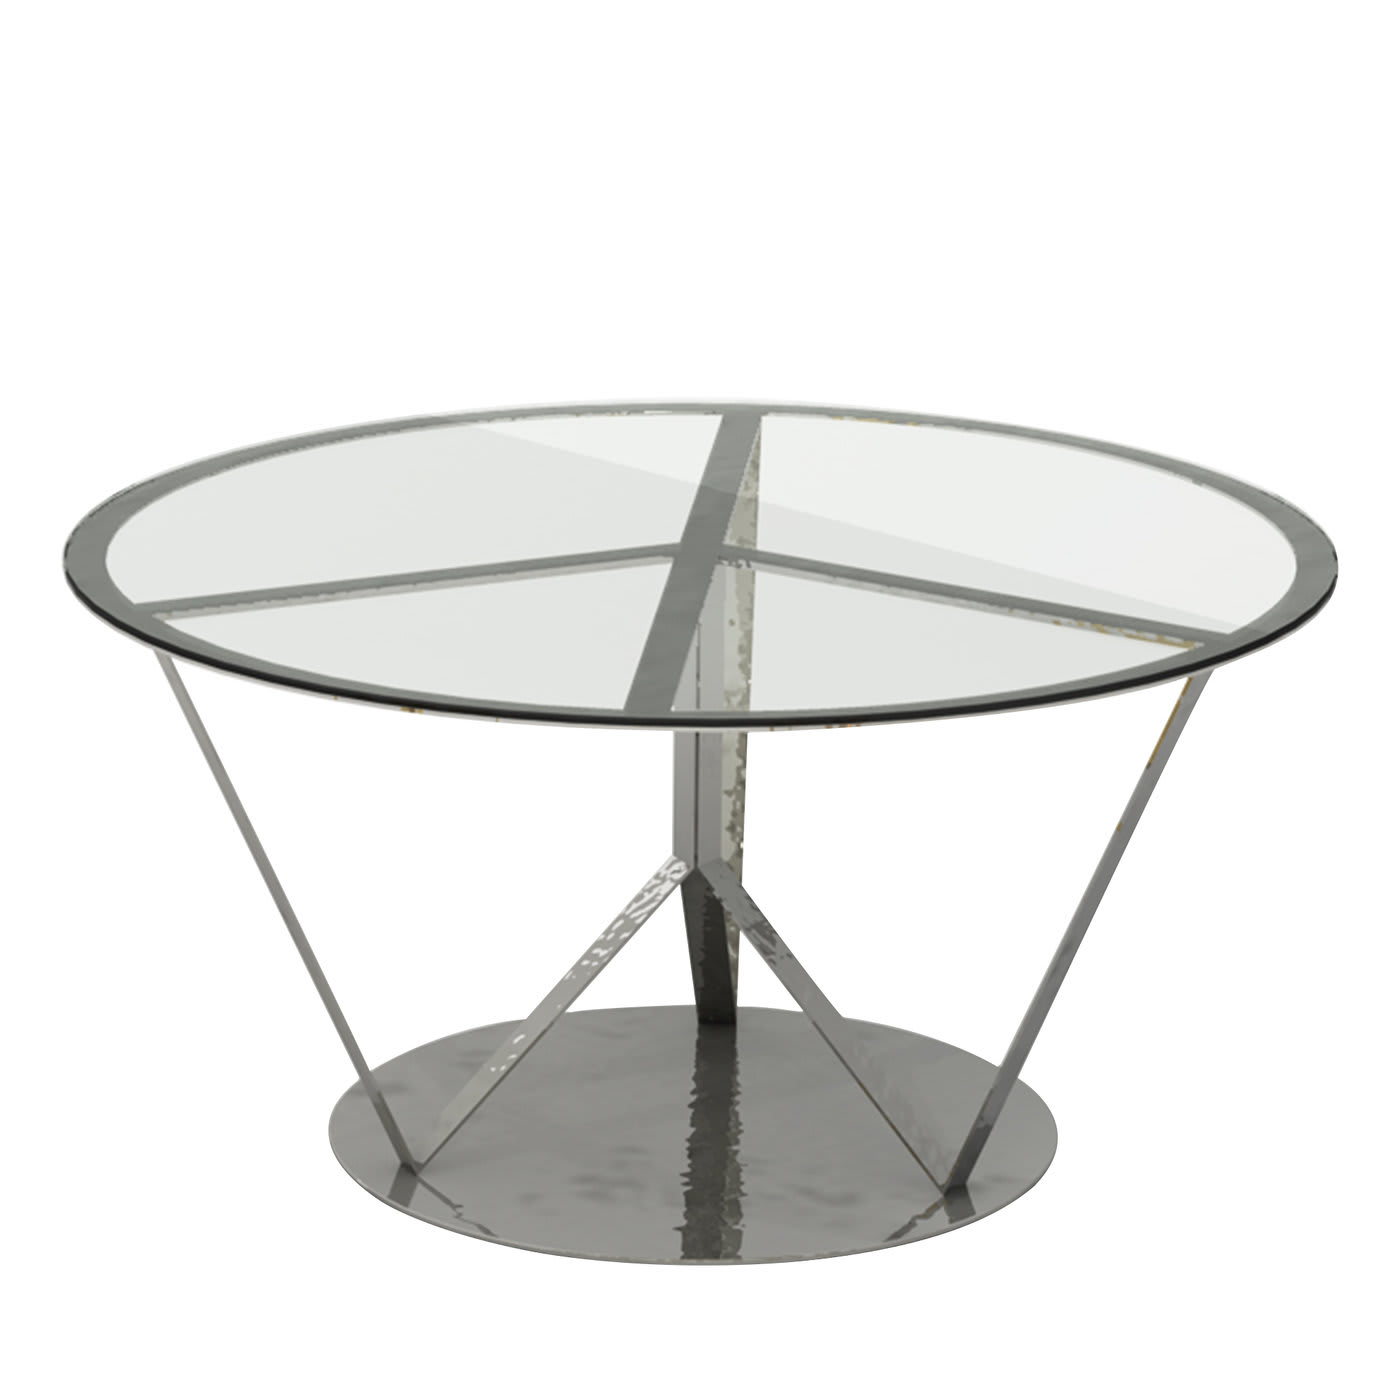 Pace Silver Table by Garilab by Piter Perbellini - Altreforme